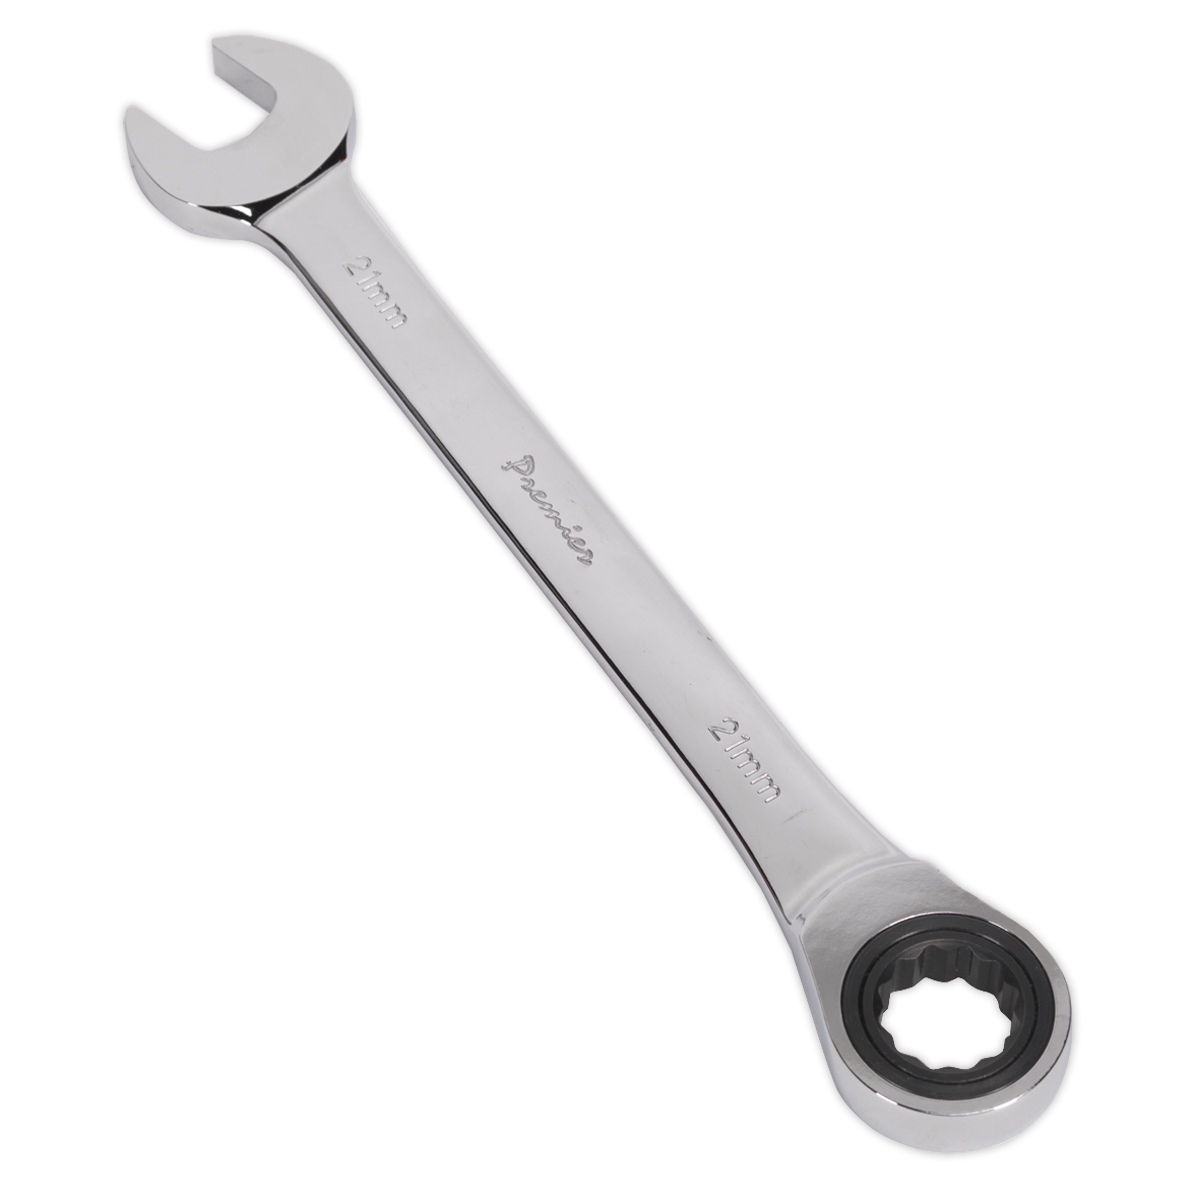 SEALEY - RCW21 Ratchet Combination Spanner 21mm